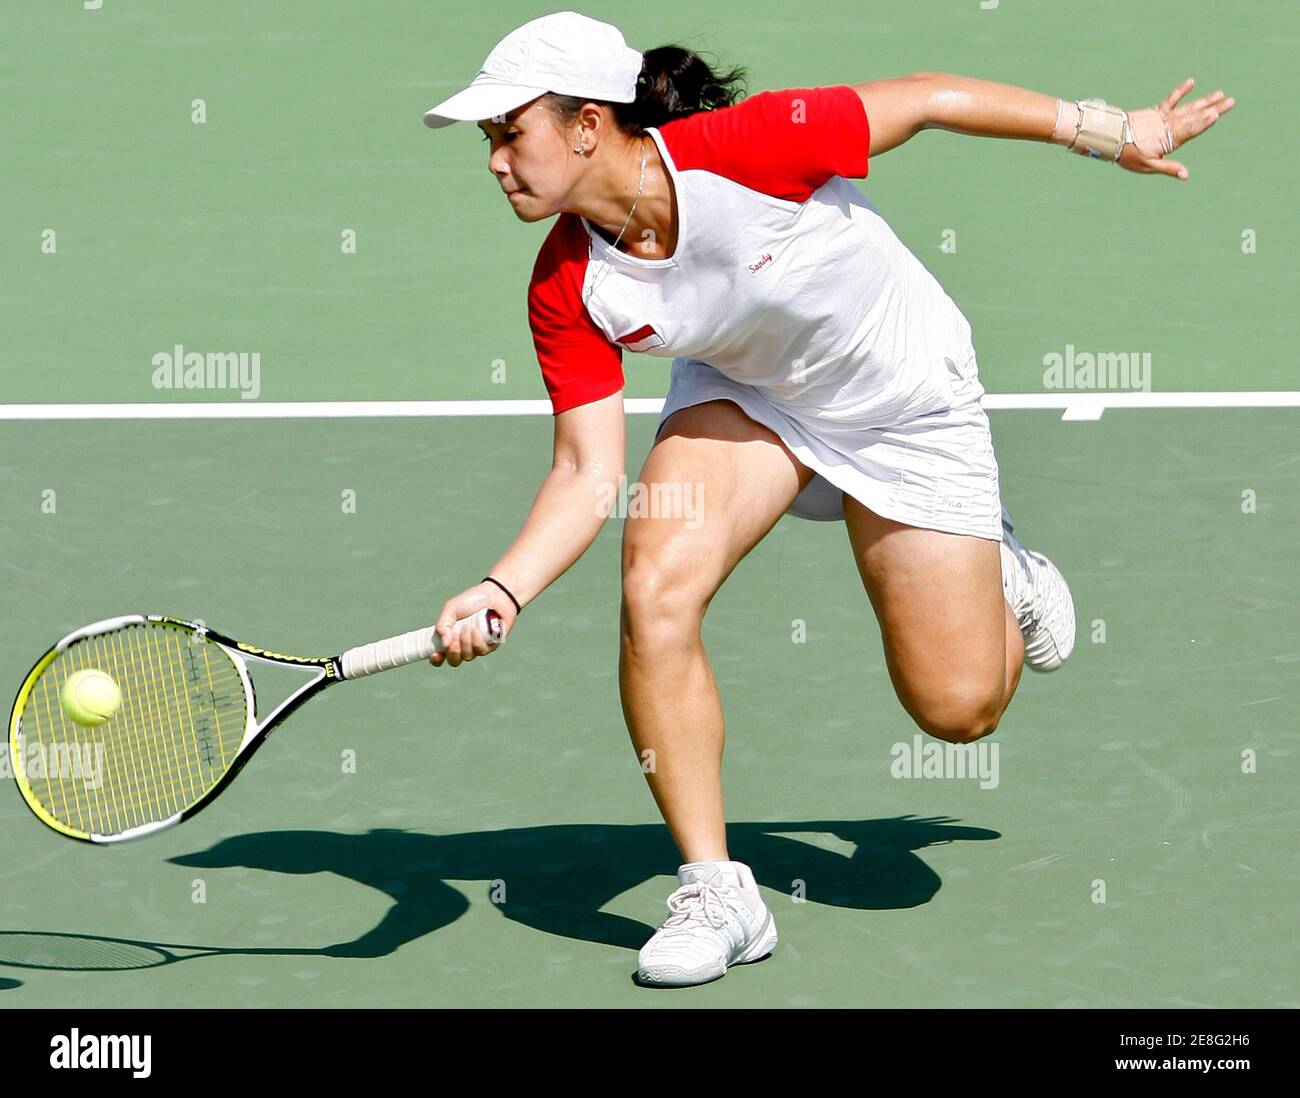 Indonesia'a Sandy Gumulya plays a shot against Thailand's Nudnida Luangnam during their women's singles tennis final match at the SEA Games in Nakhon Ratchasima December 14, 2007. Sandy won to take the gold. REUTERS/Chaiwat Subprasom (THAILAND) Stock Photo